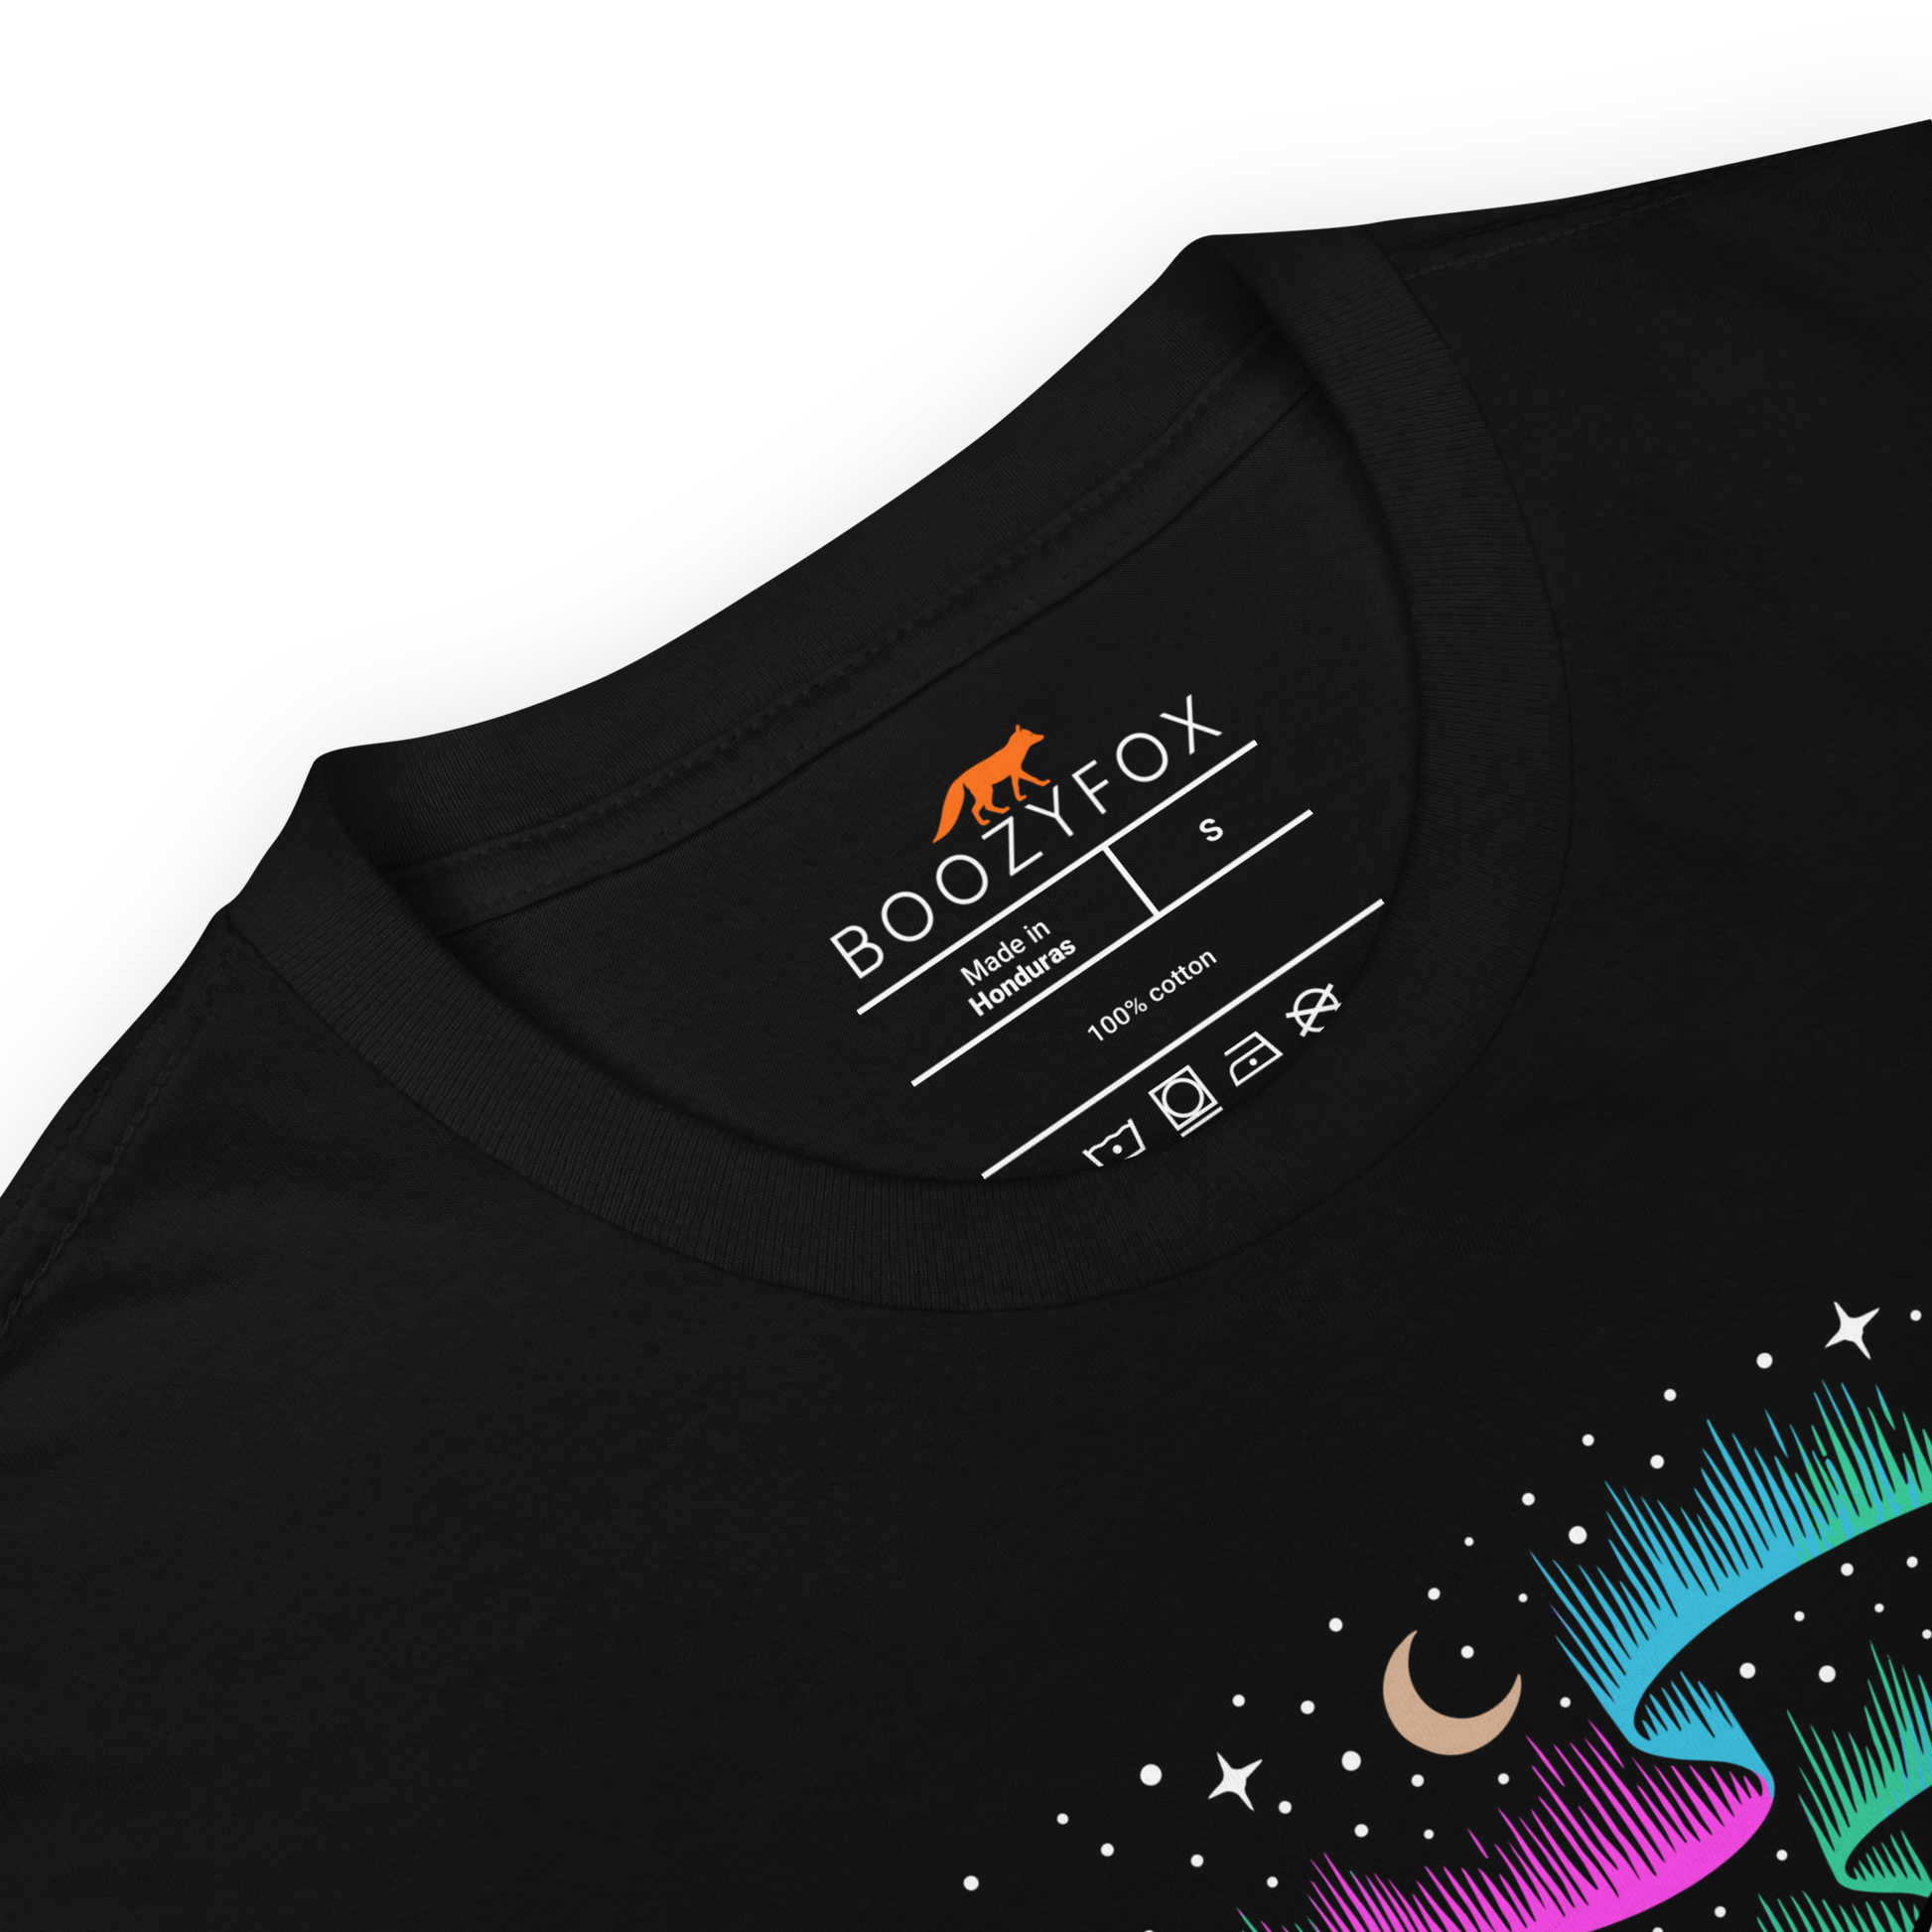 Product details of a Black Let's Get Lost T-Shirt featuring a mesmerizing night sky, adorned with stars and aurora borealis graphic on the chest - Cool Graphic Northern Lights T-Shirts - Boozy Fox